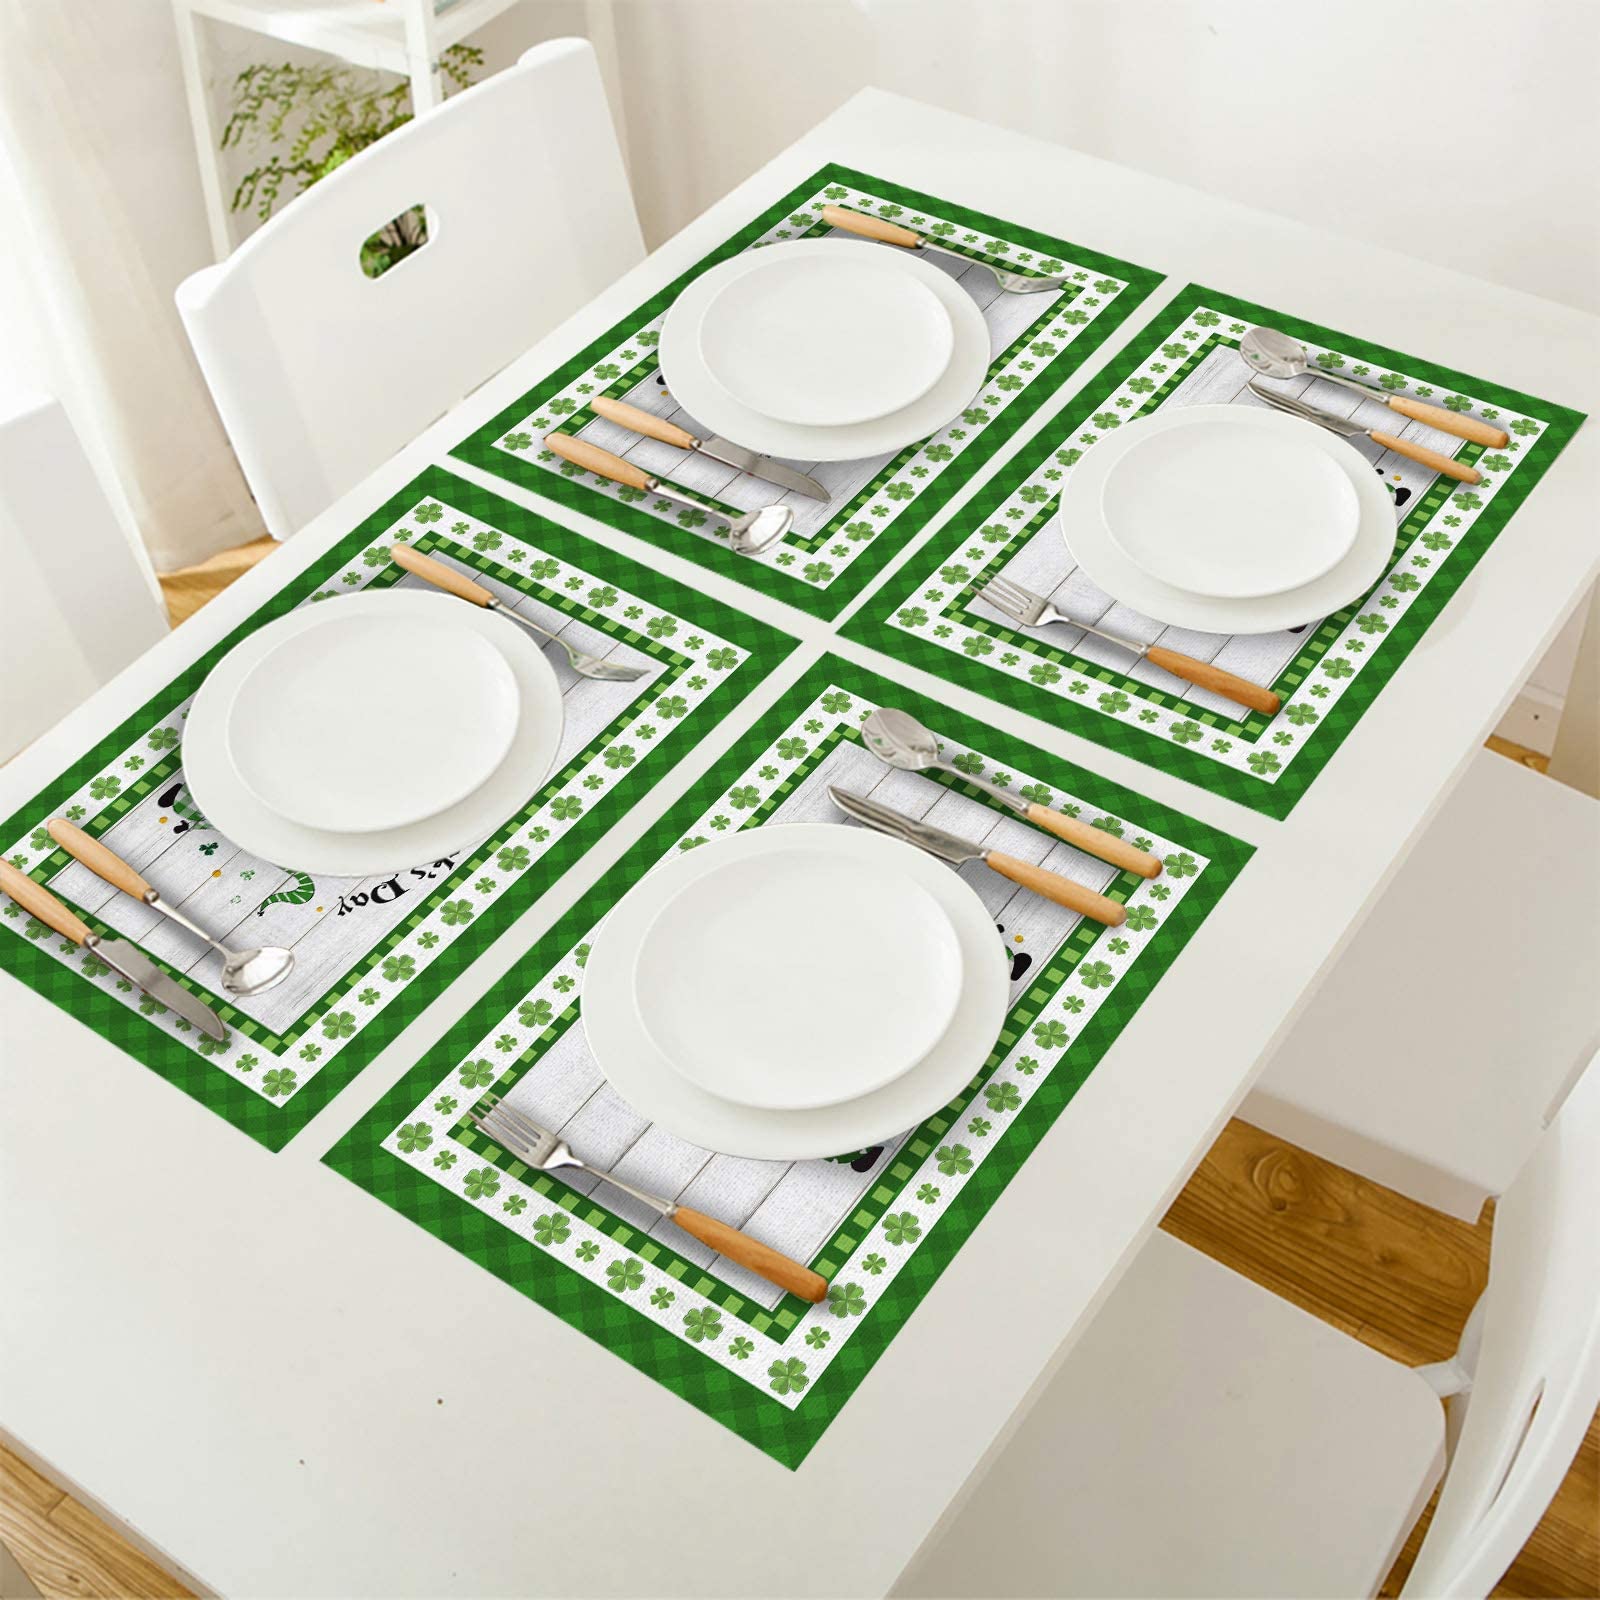 Happy St. Patrick's Day - Gnome Family Placemat